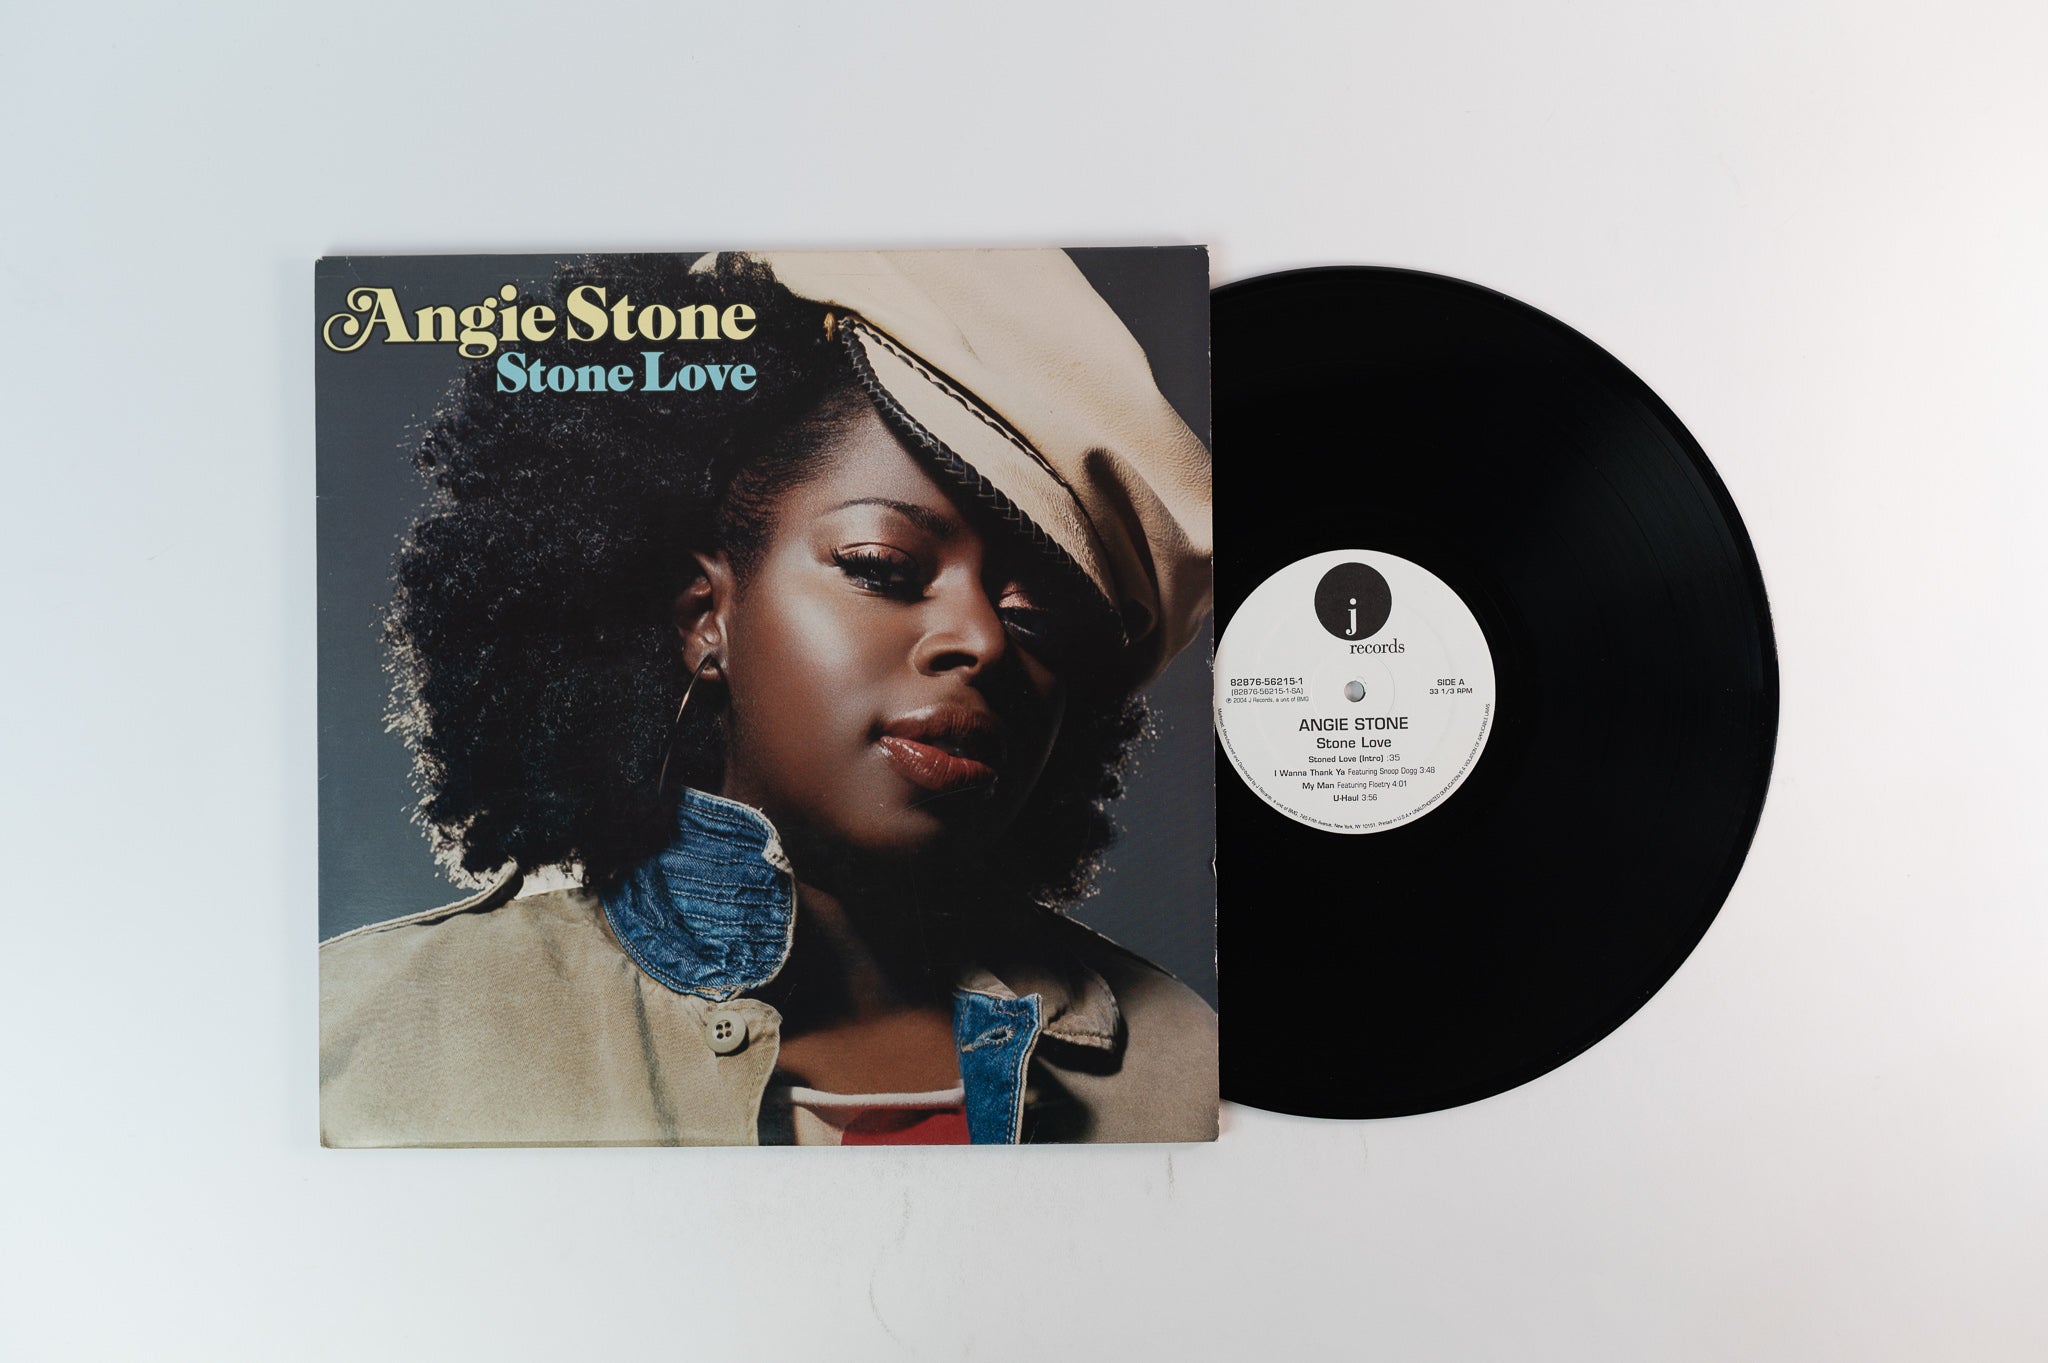 Angie Stone - Stone Love on J Records